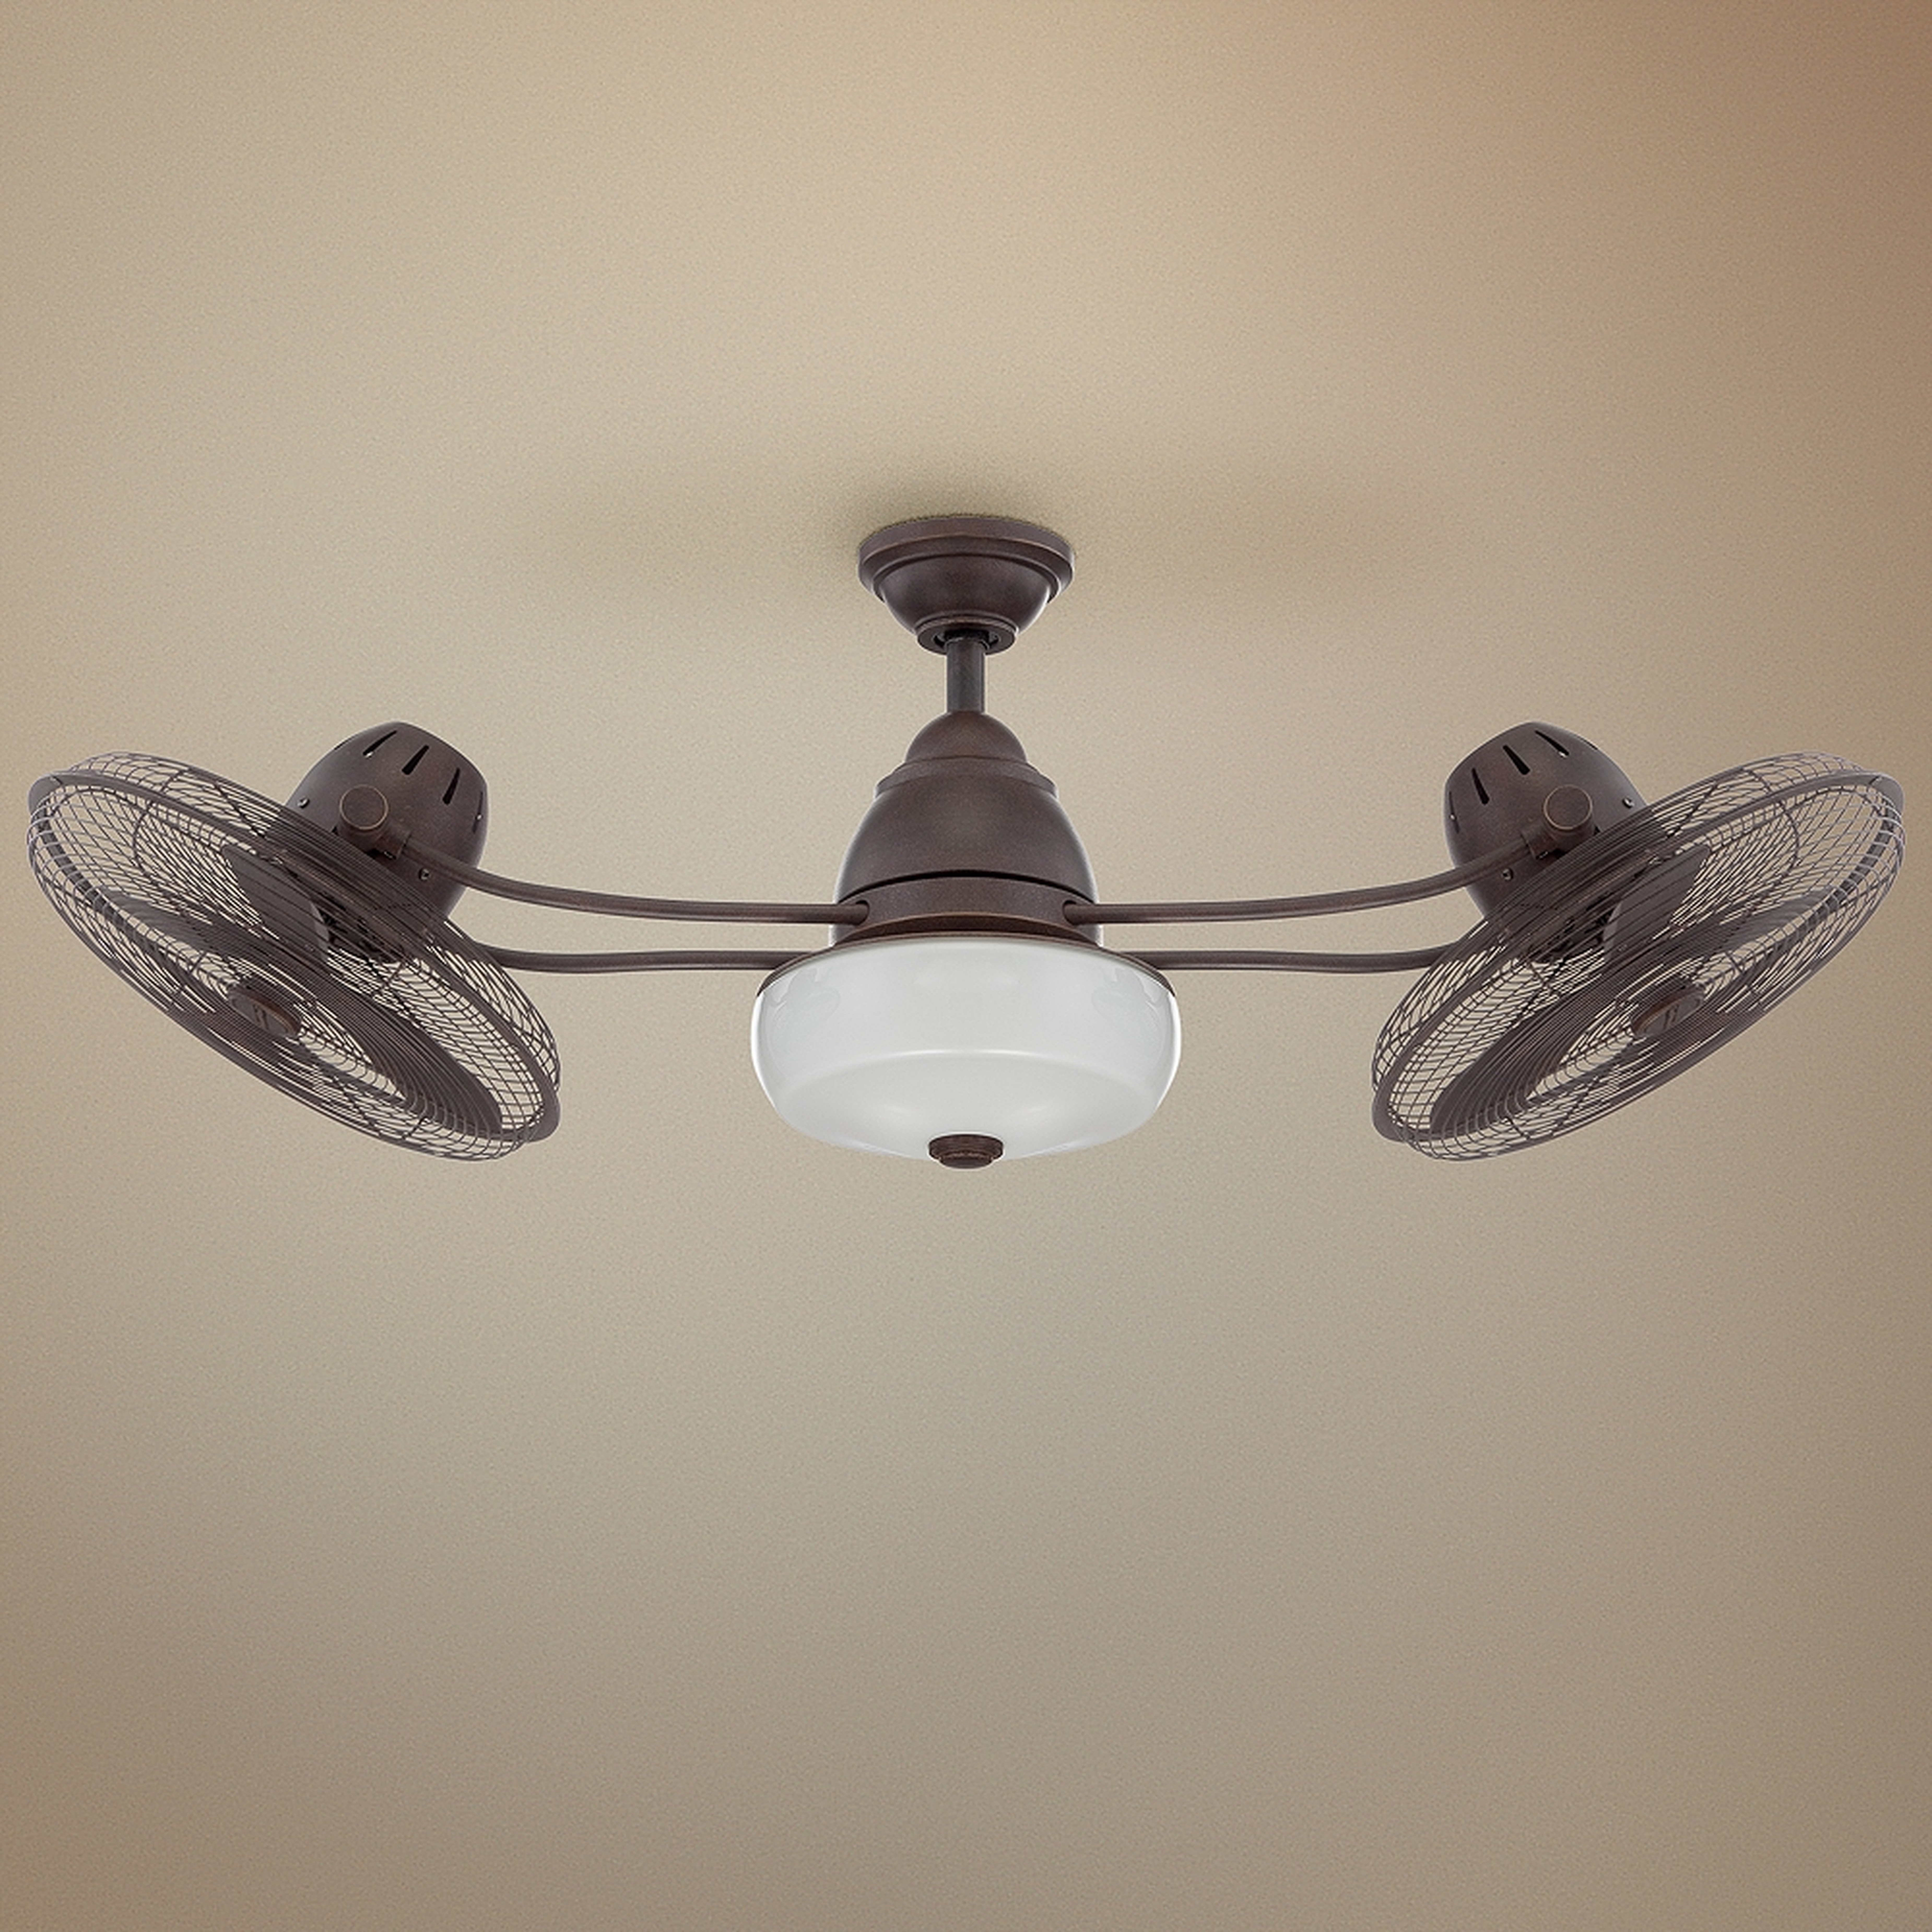 48" Craftmade Bellows II Aged Bronze LED Damp Ceiling Fan - Style # 6Y934 - Lamps Plus